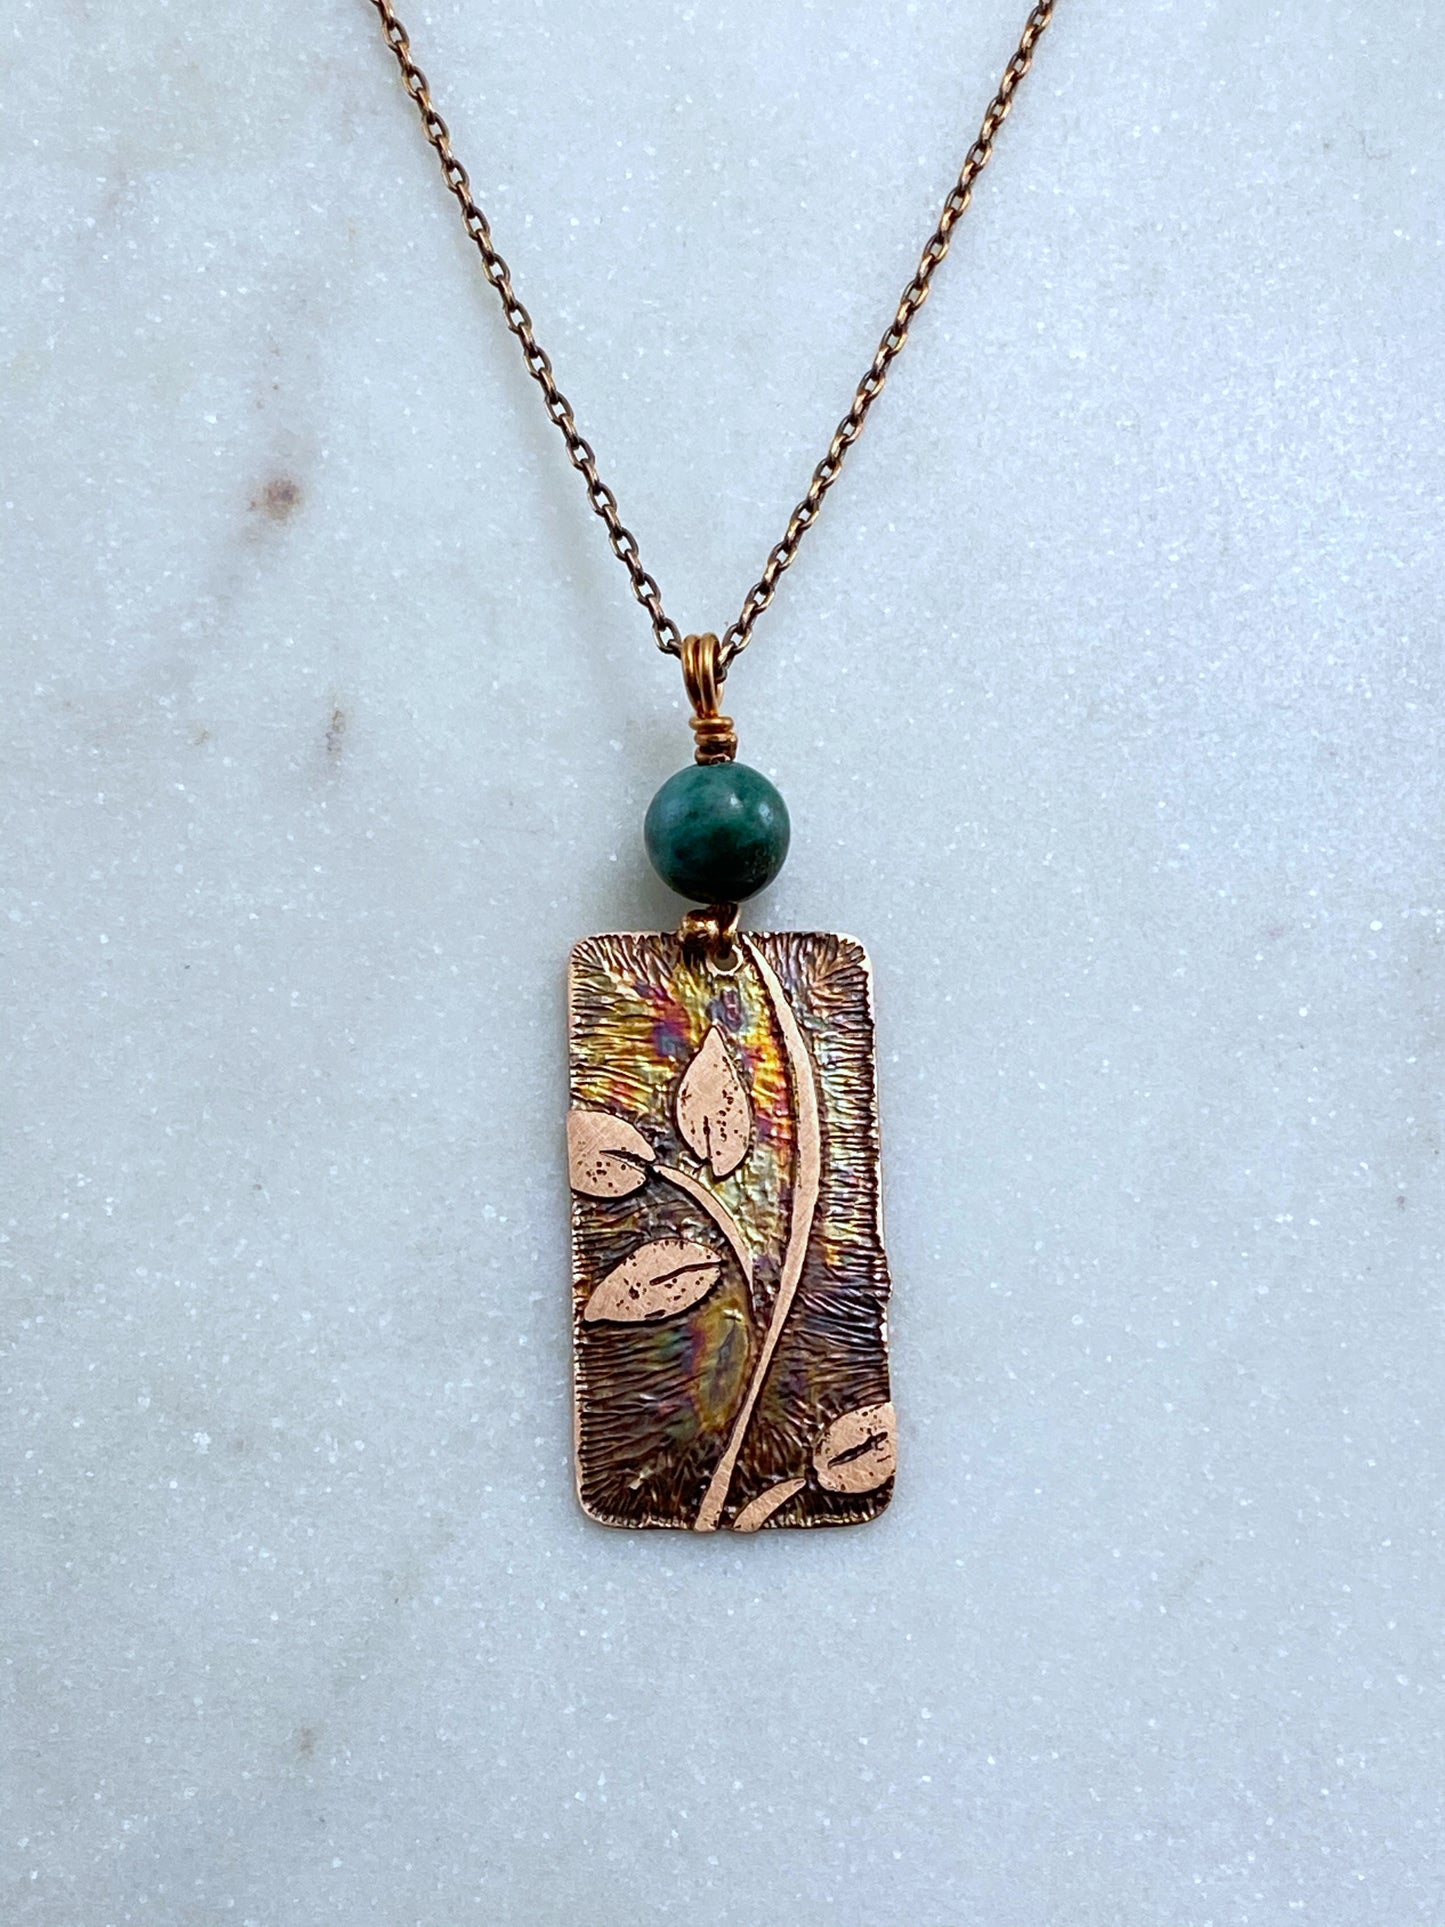 Acid etched copper leaf necklace with chrysocalla